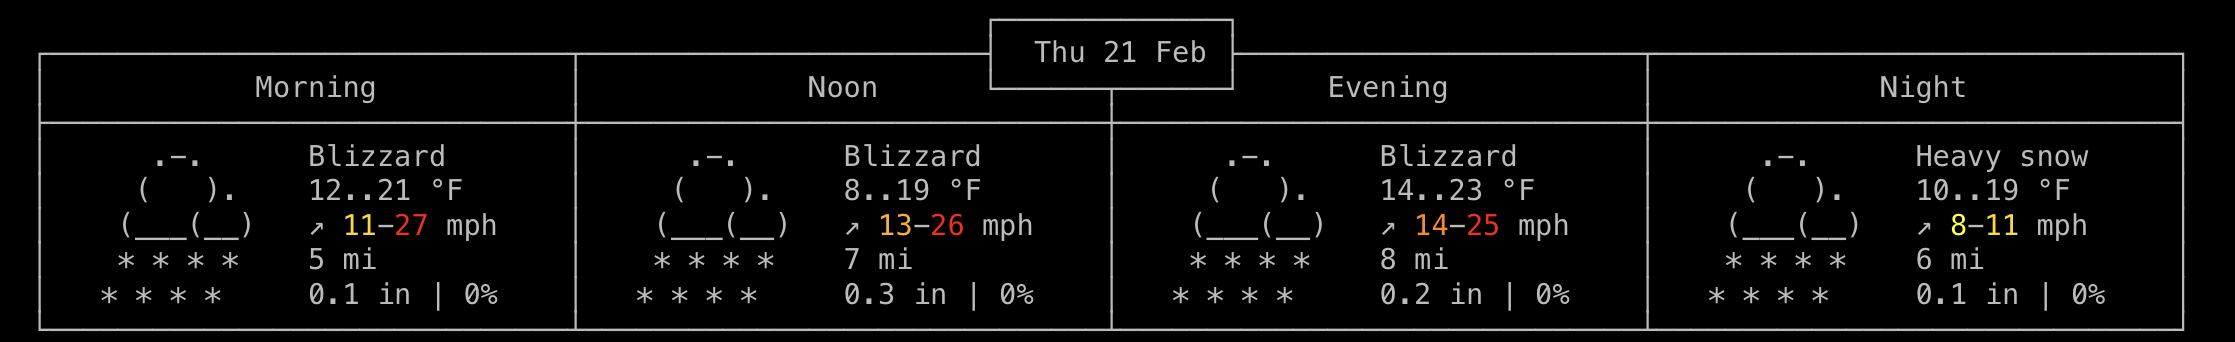 Screenshot of a forecast showing a blizzard all day.  